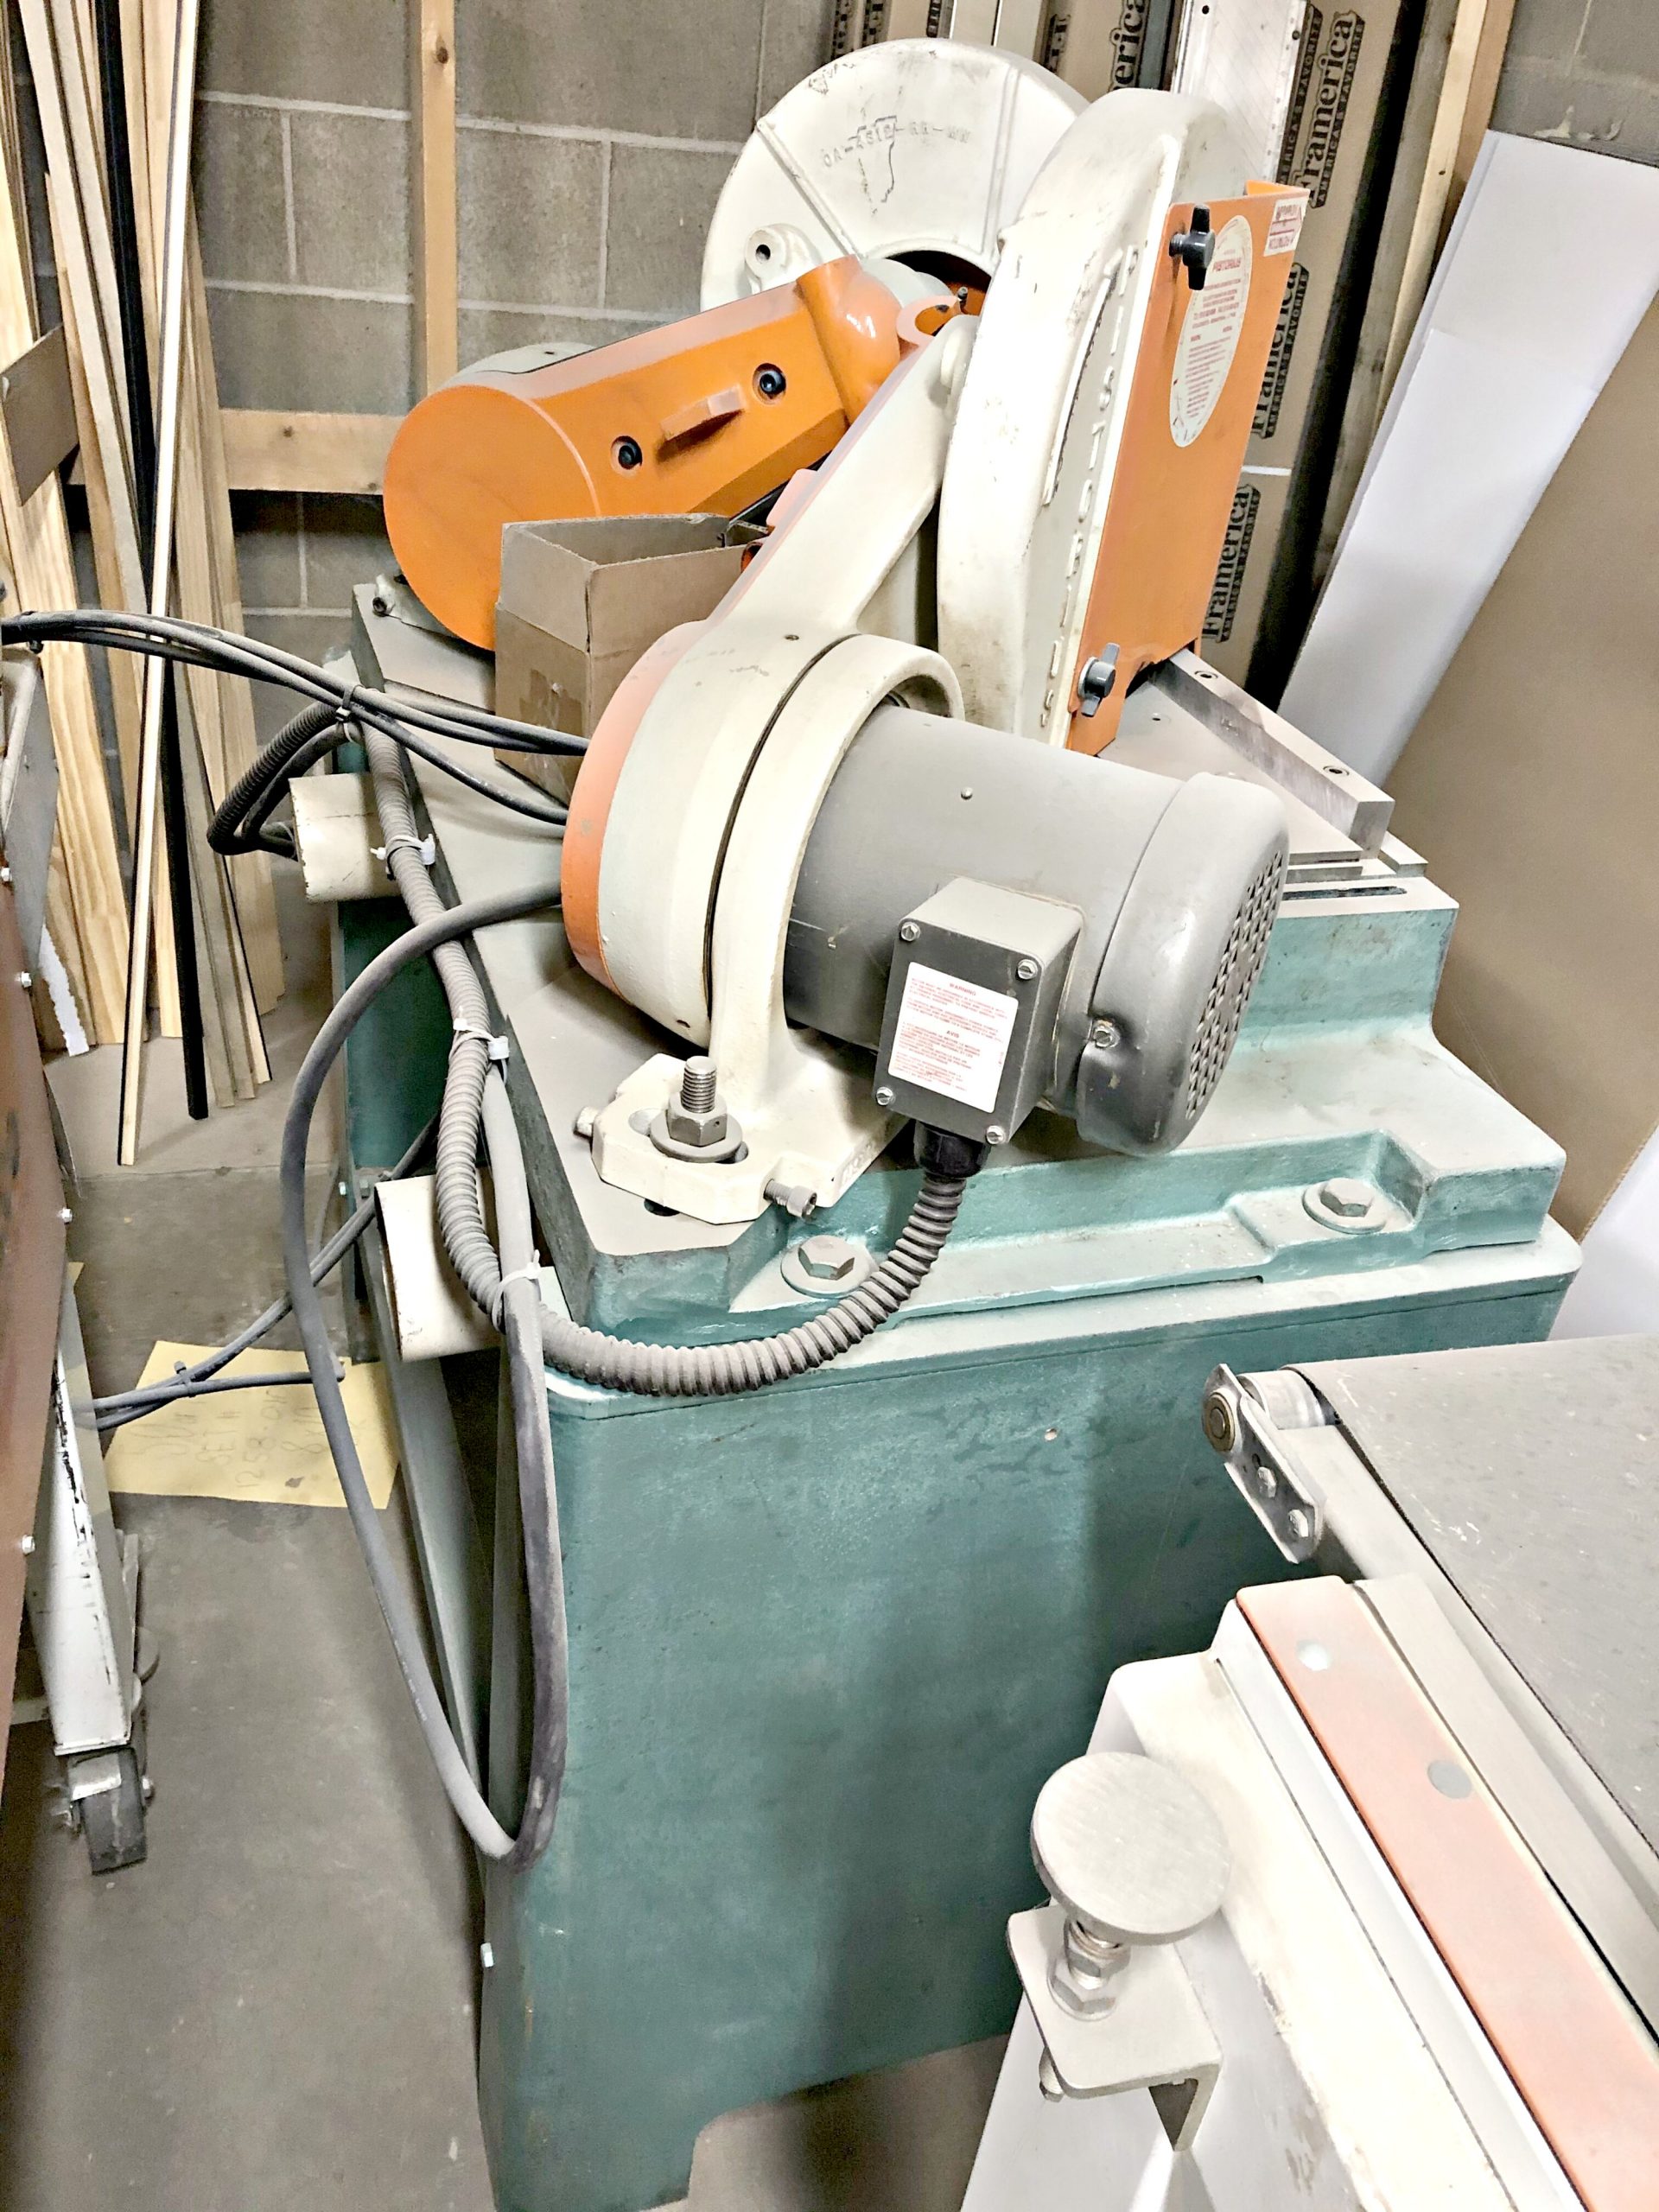 Equipment Lot: Pistorius MN-200 Double Miter Saw, ITW AMP VN4+E3 Frame Joiner, Belco ILS 3022 L- Sealer, & Belco Shrink Tunnel (Used) Item # AGFS-94 (Illinois)